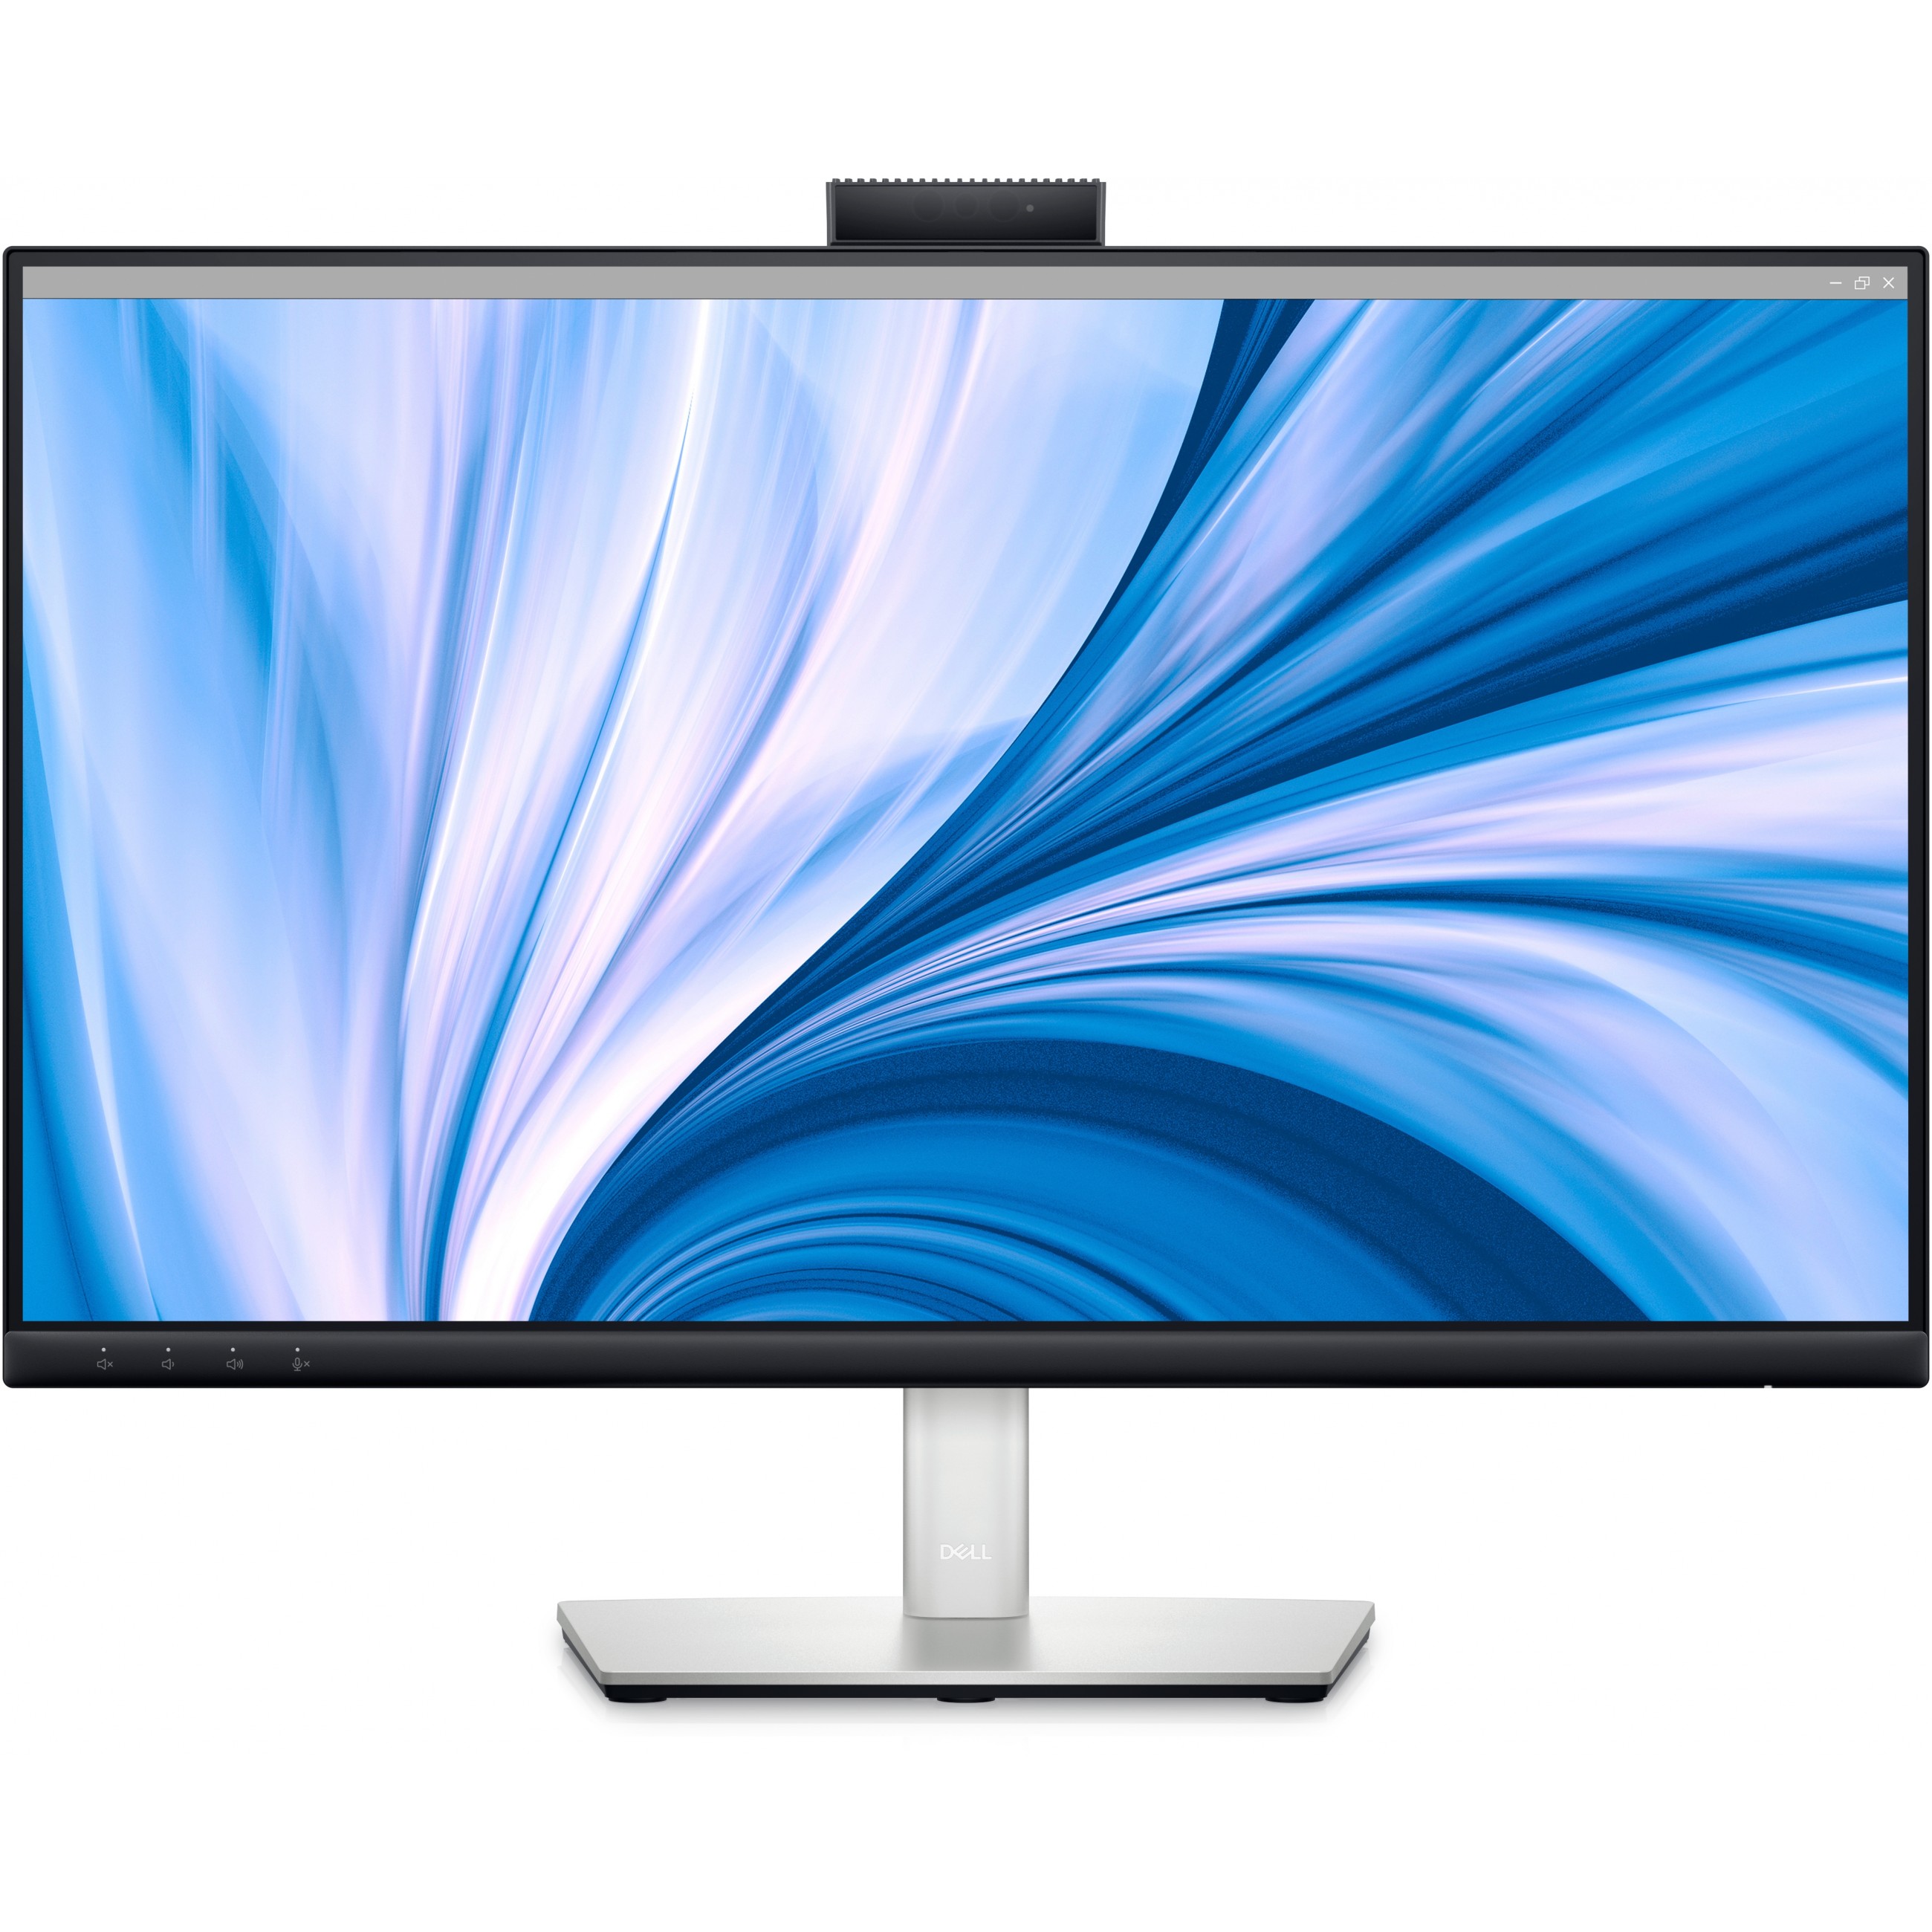 DELL C Series C2423H LED display - DELL-C2423H